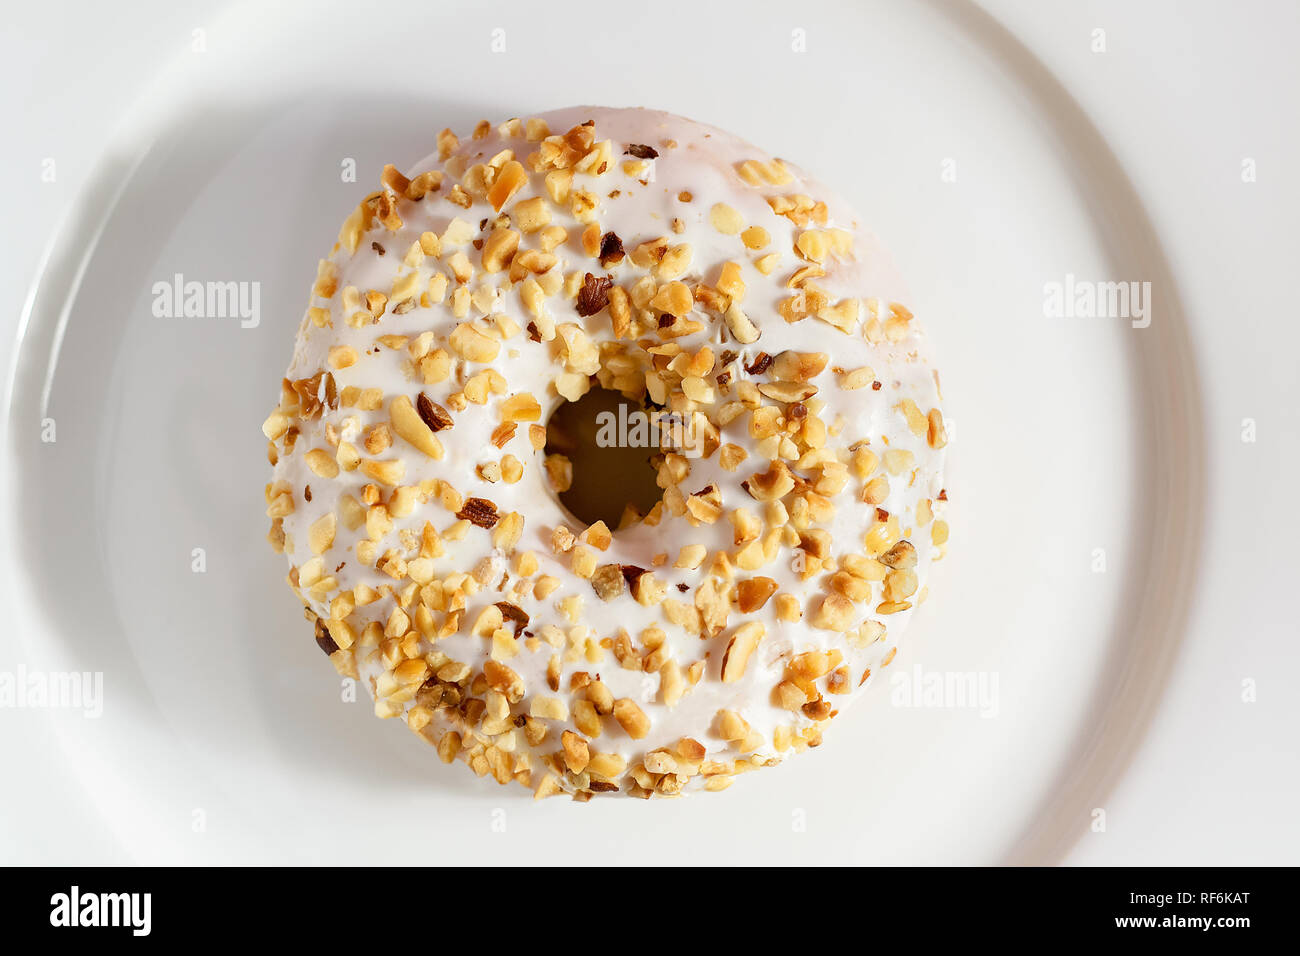 Donut with white chocolate and sprinkled with nuts on top, laid on white glossy plate. Stock Photo